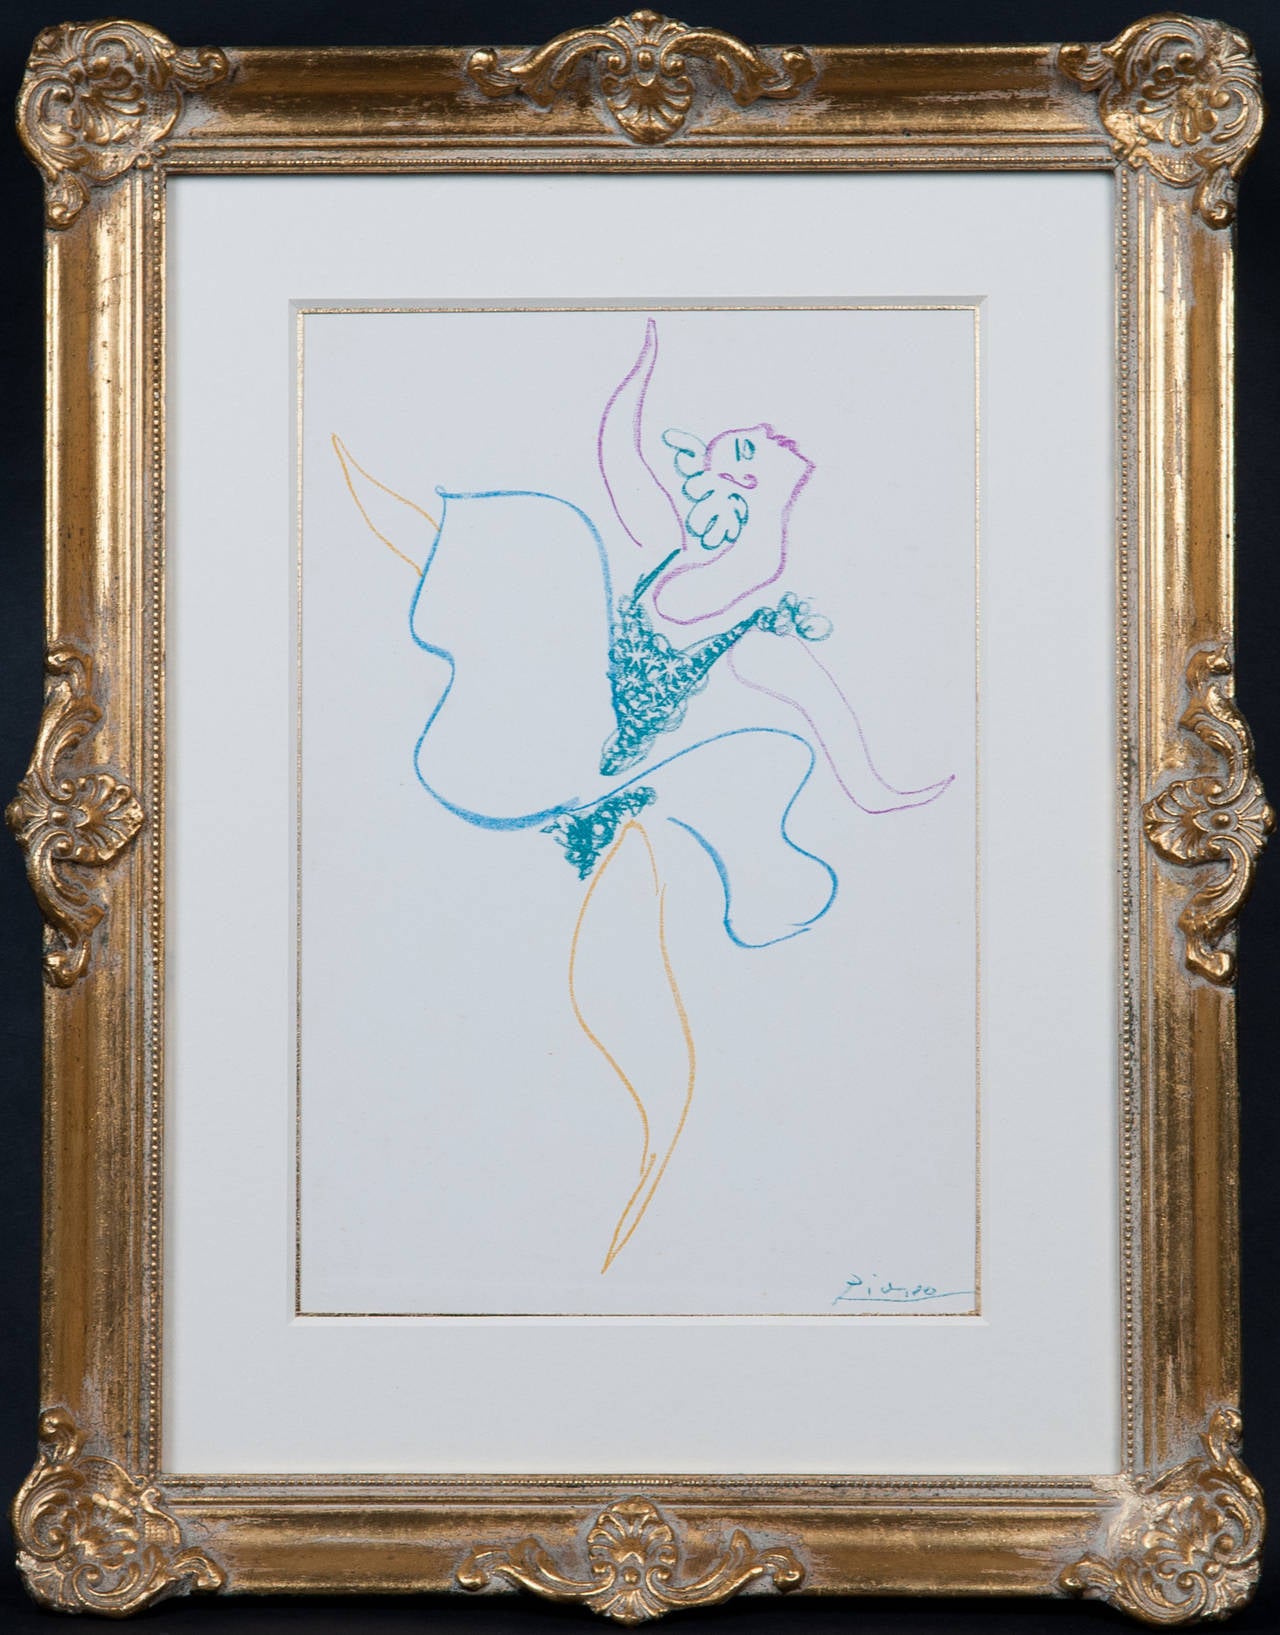 Dancer - Print by Pablo Picasso